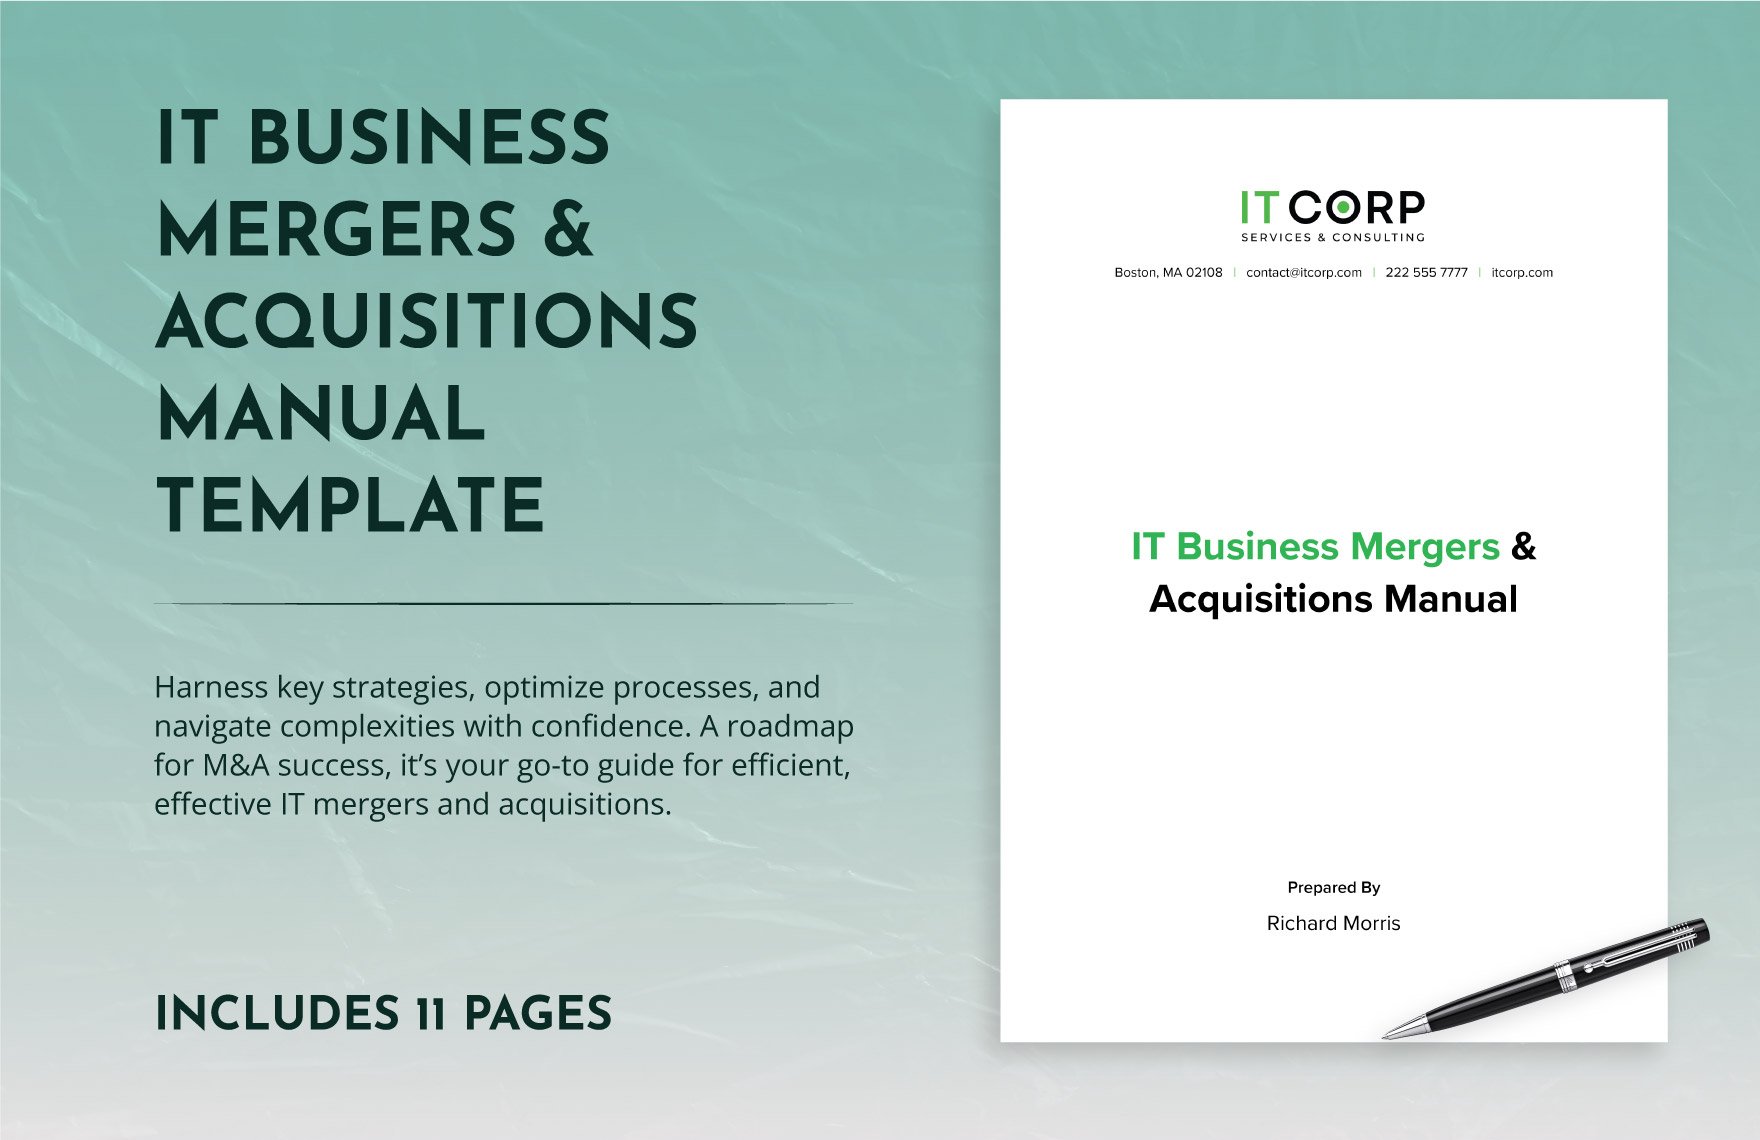 IT Business Mergers & Acquisitions Manual Template